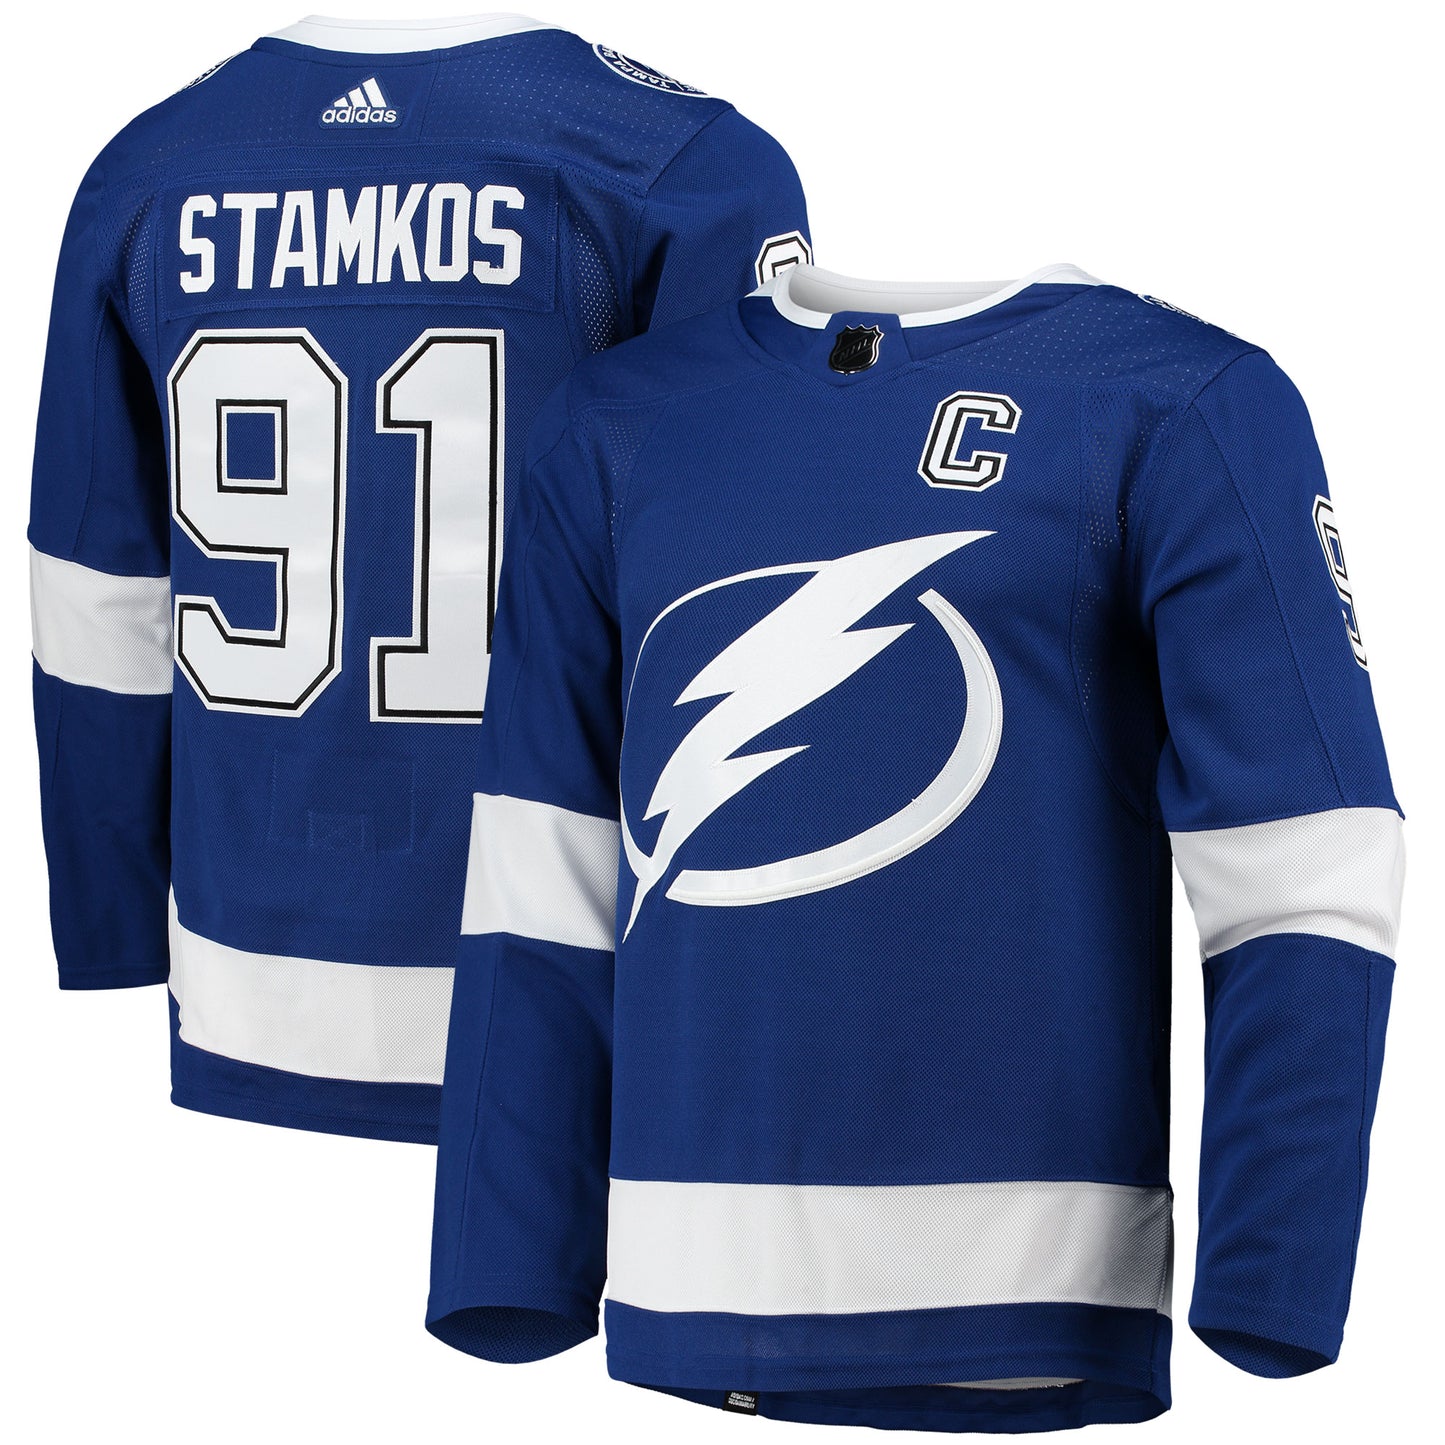 Steven Stamkos Tampa Bay Lightning adidas Home Primegreen Authentic Pro Player Jersey - Blue